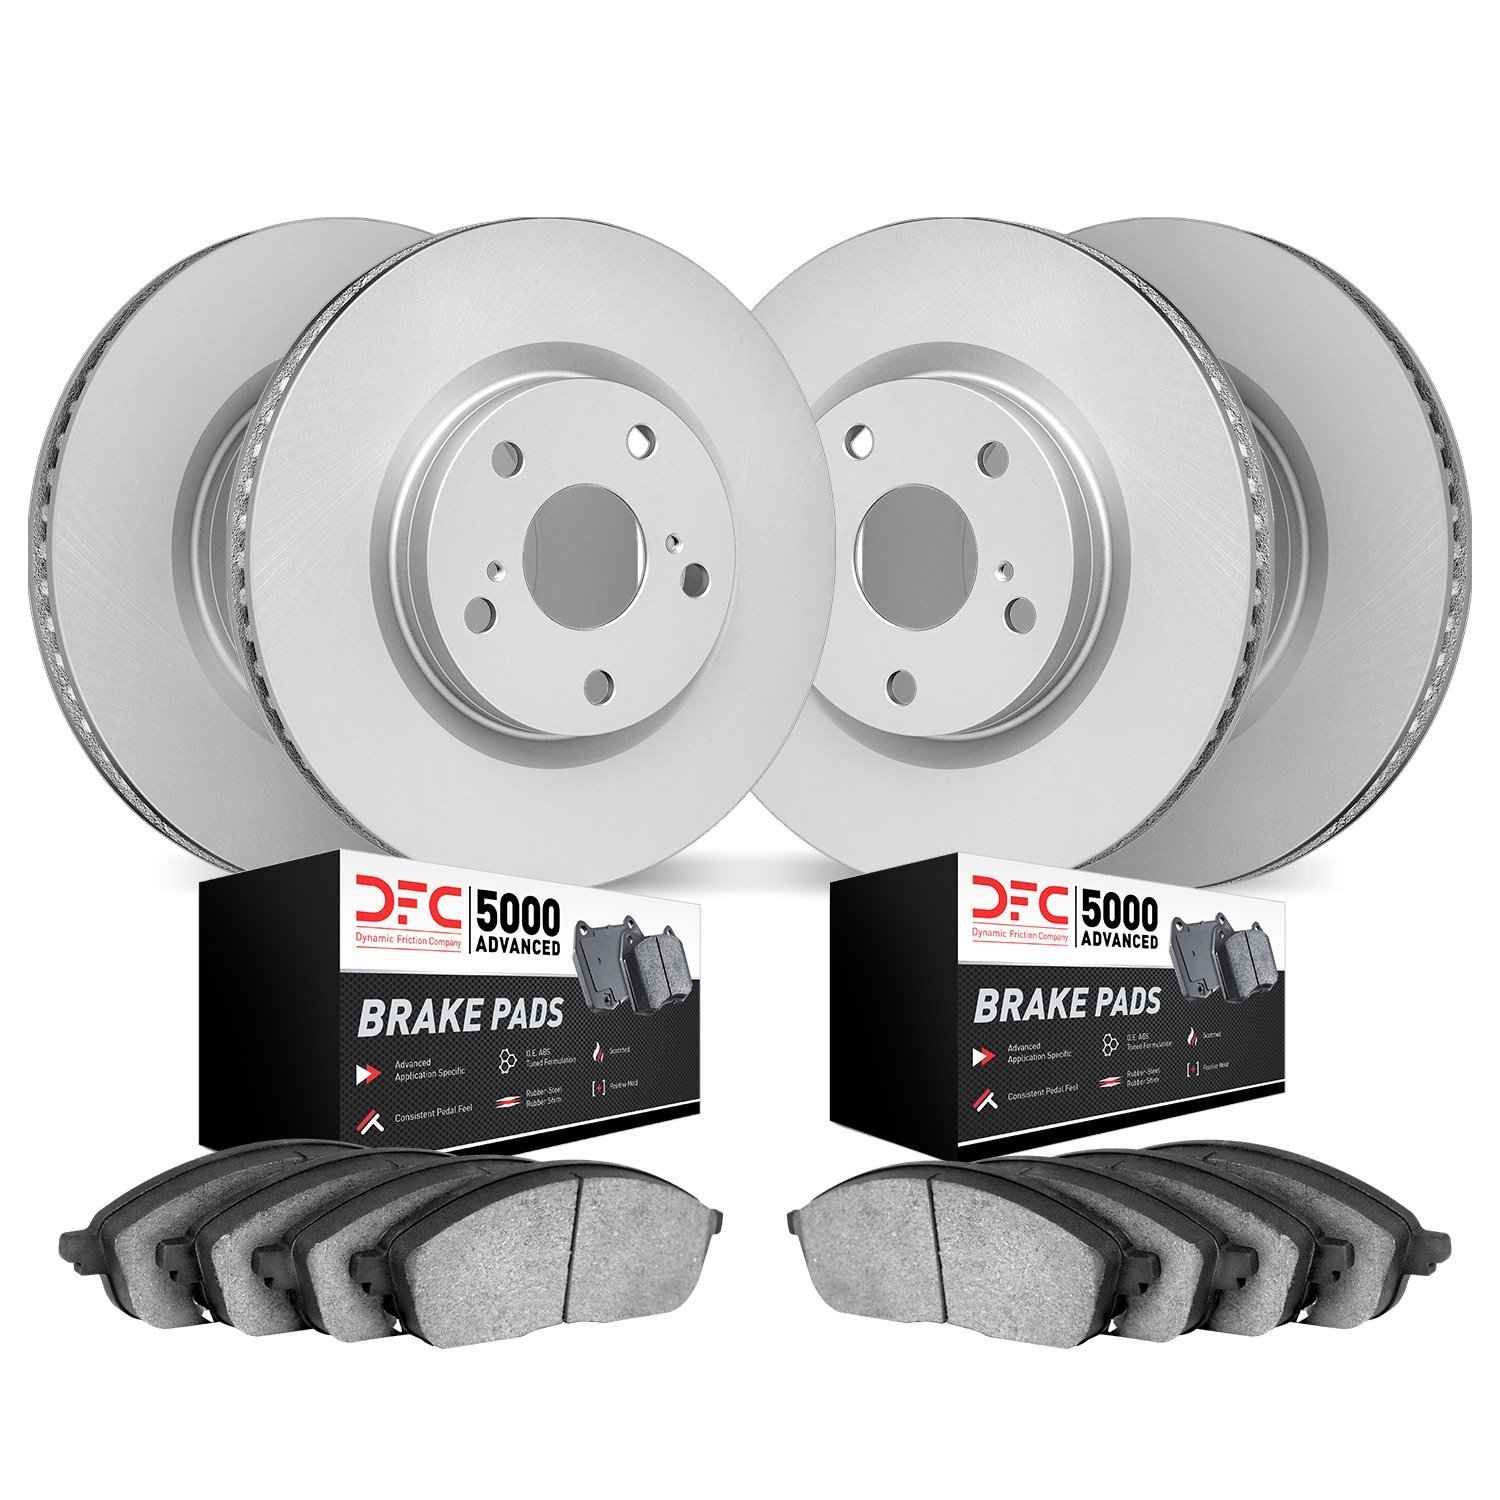 4504-31136 Geospec Brake Rotors w/5000 Advanced Brake Pads Kit, Fits Select BMW, Position: Front and Rear